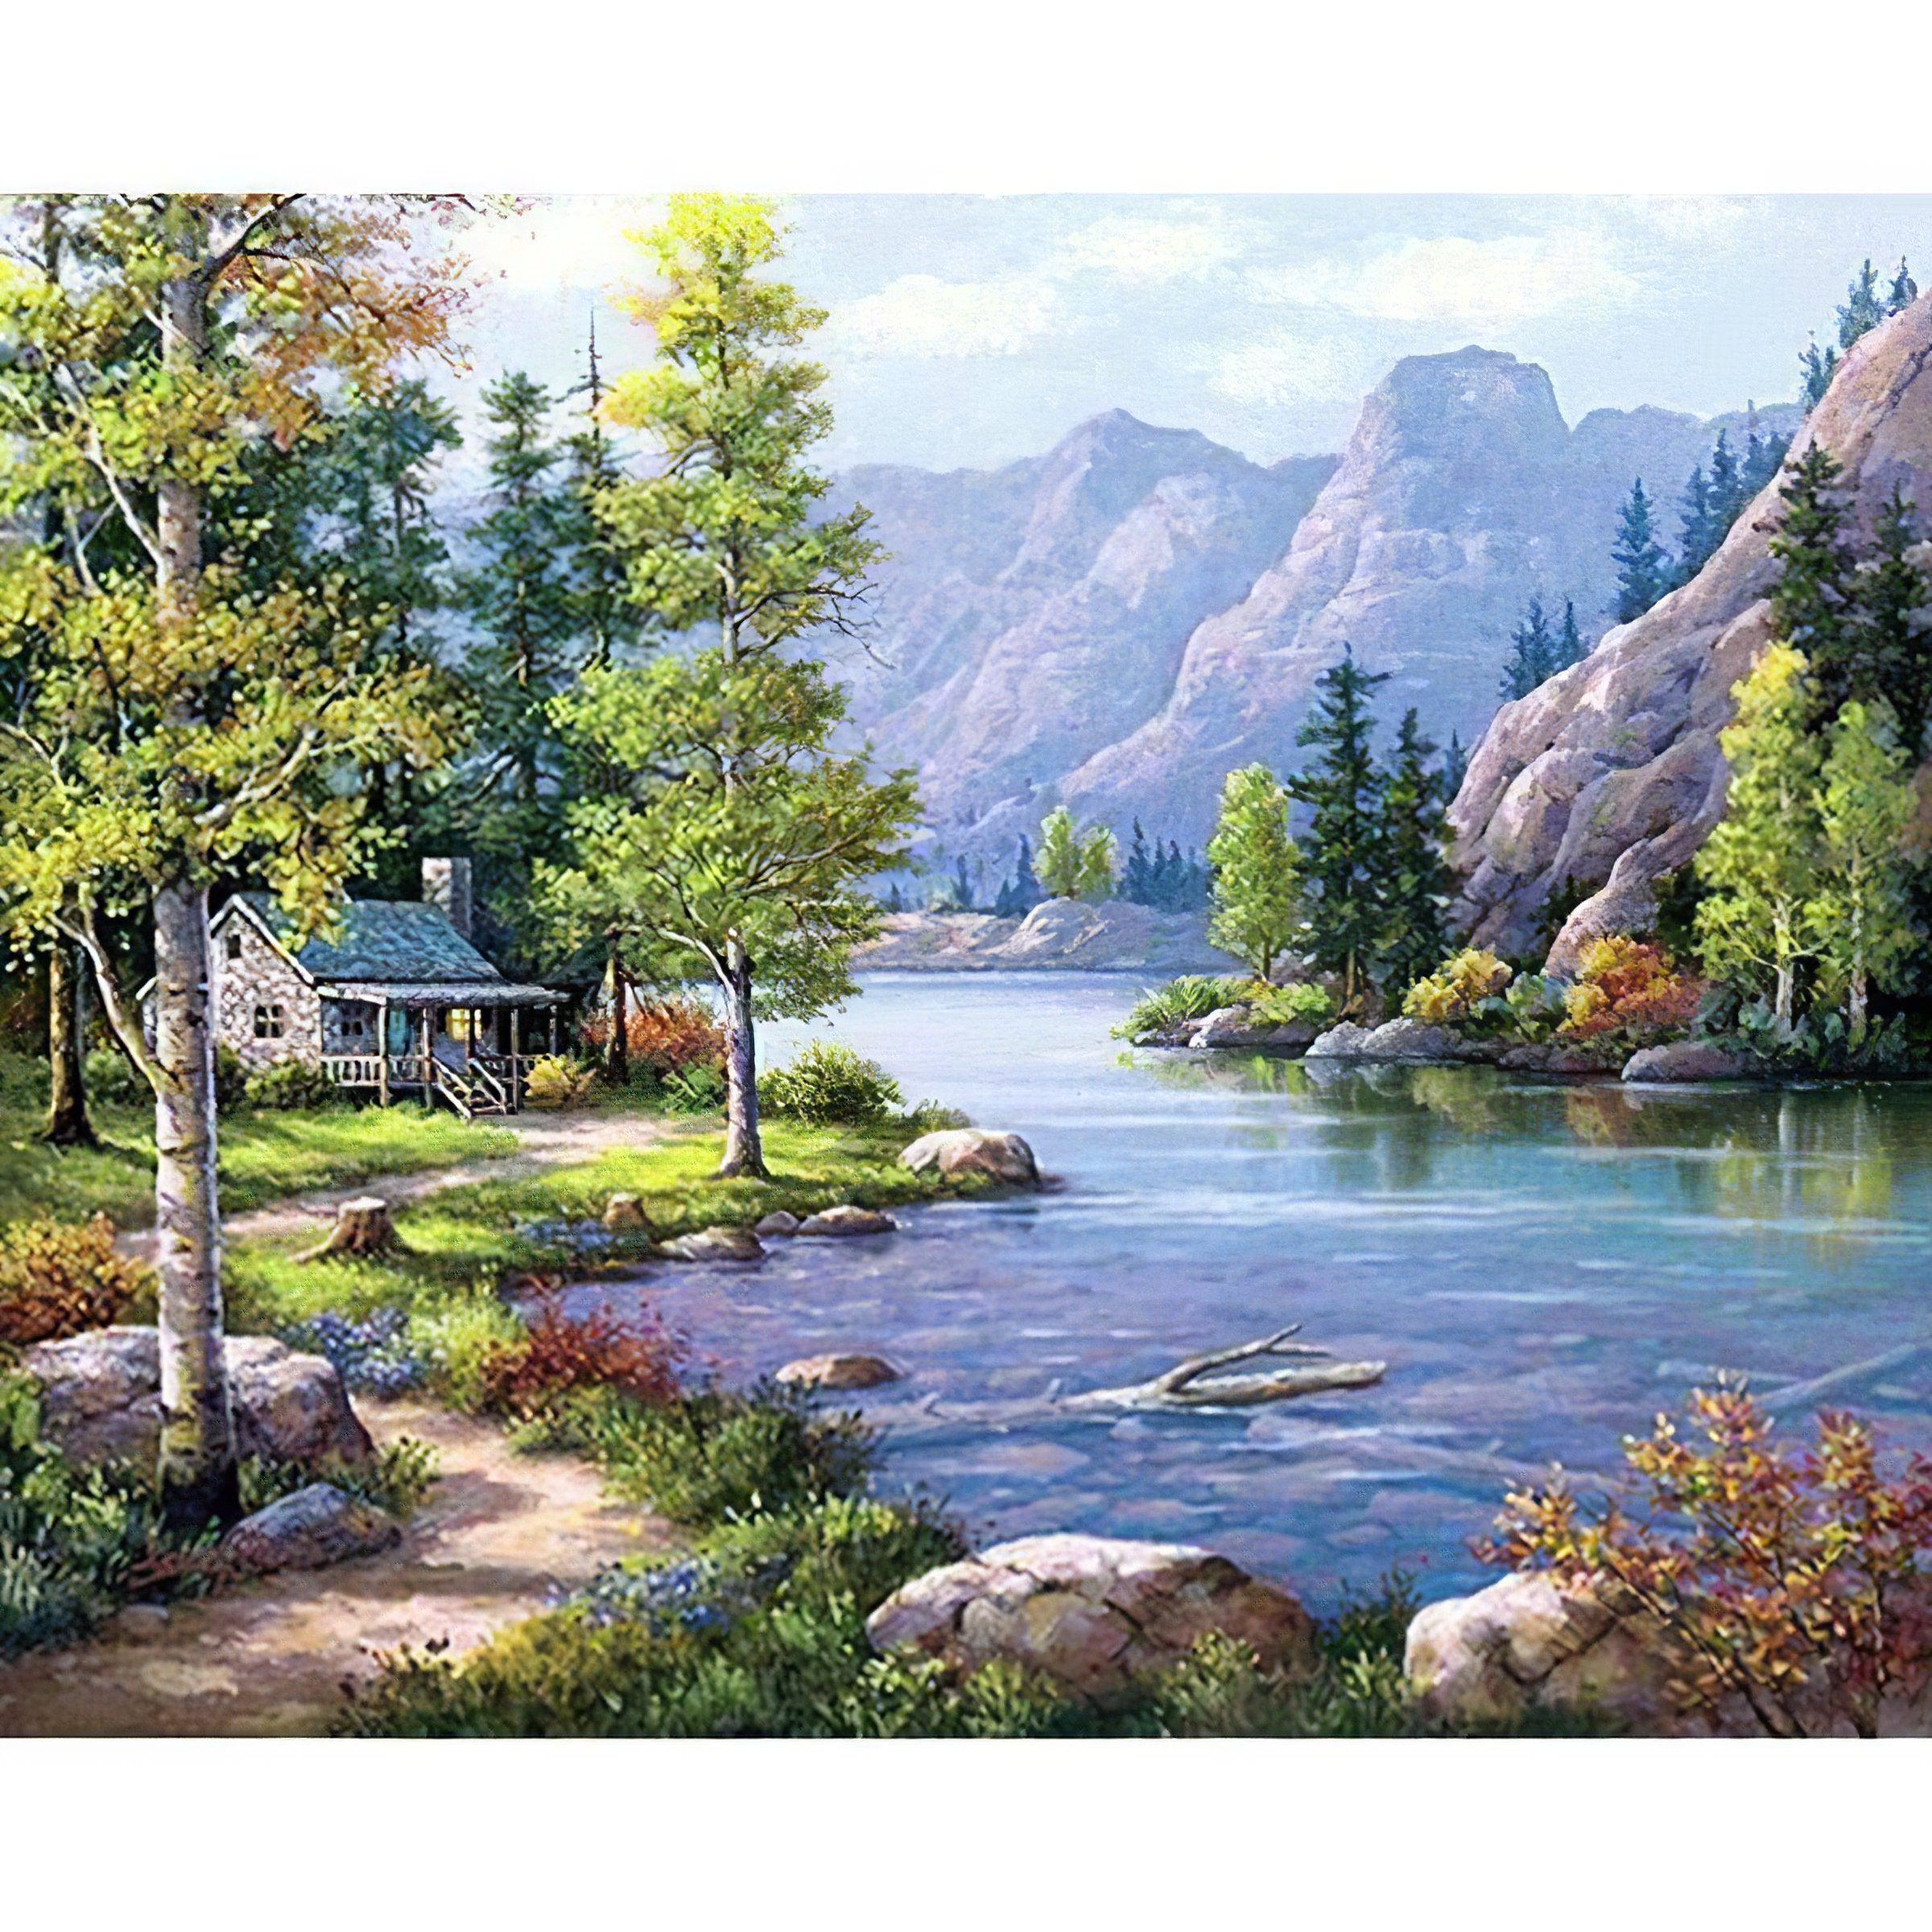 Capture tranquility with our Peaceful Scenery kit - serene views for calm seekers.A Peaceful Scenery - Diamondartlove